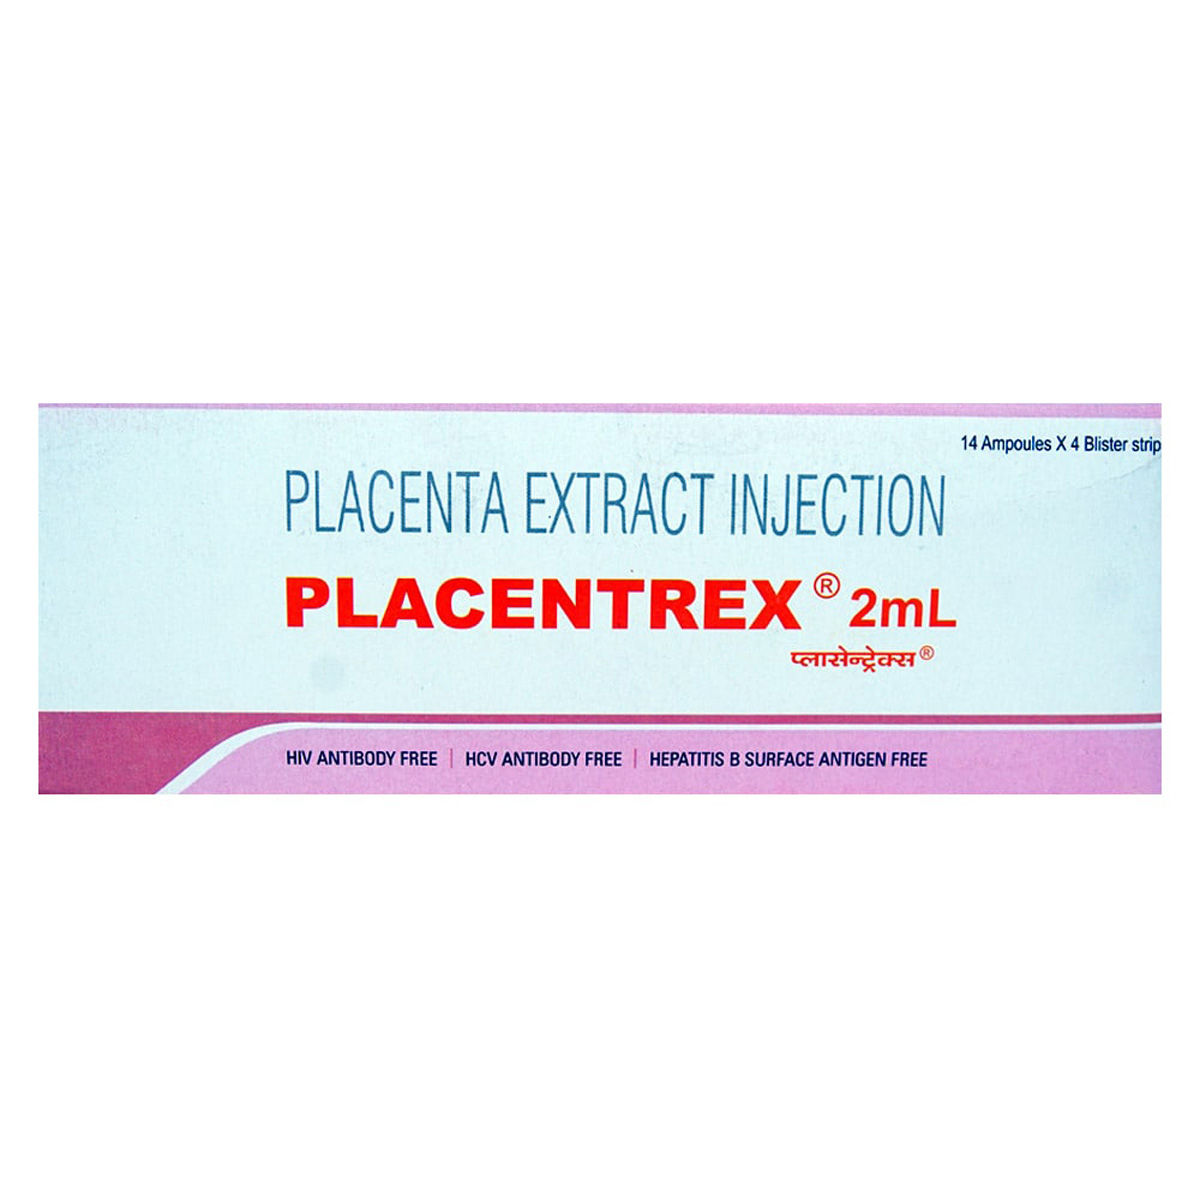 Buy Placentrex Injection 7 x 2 ml Online